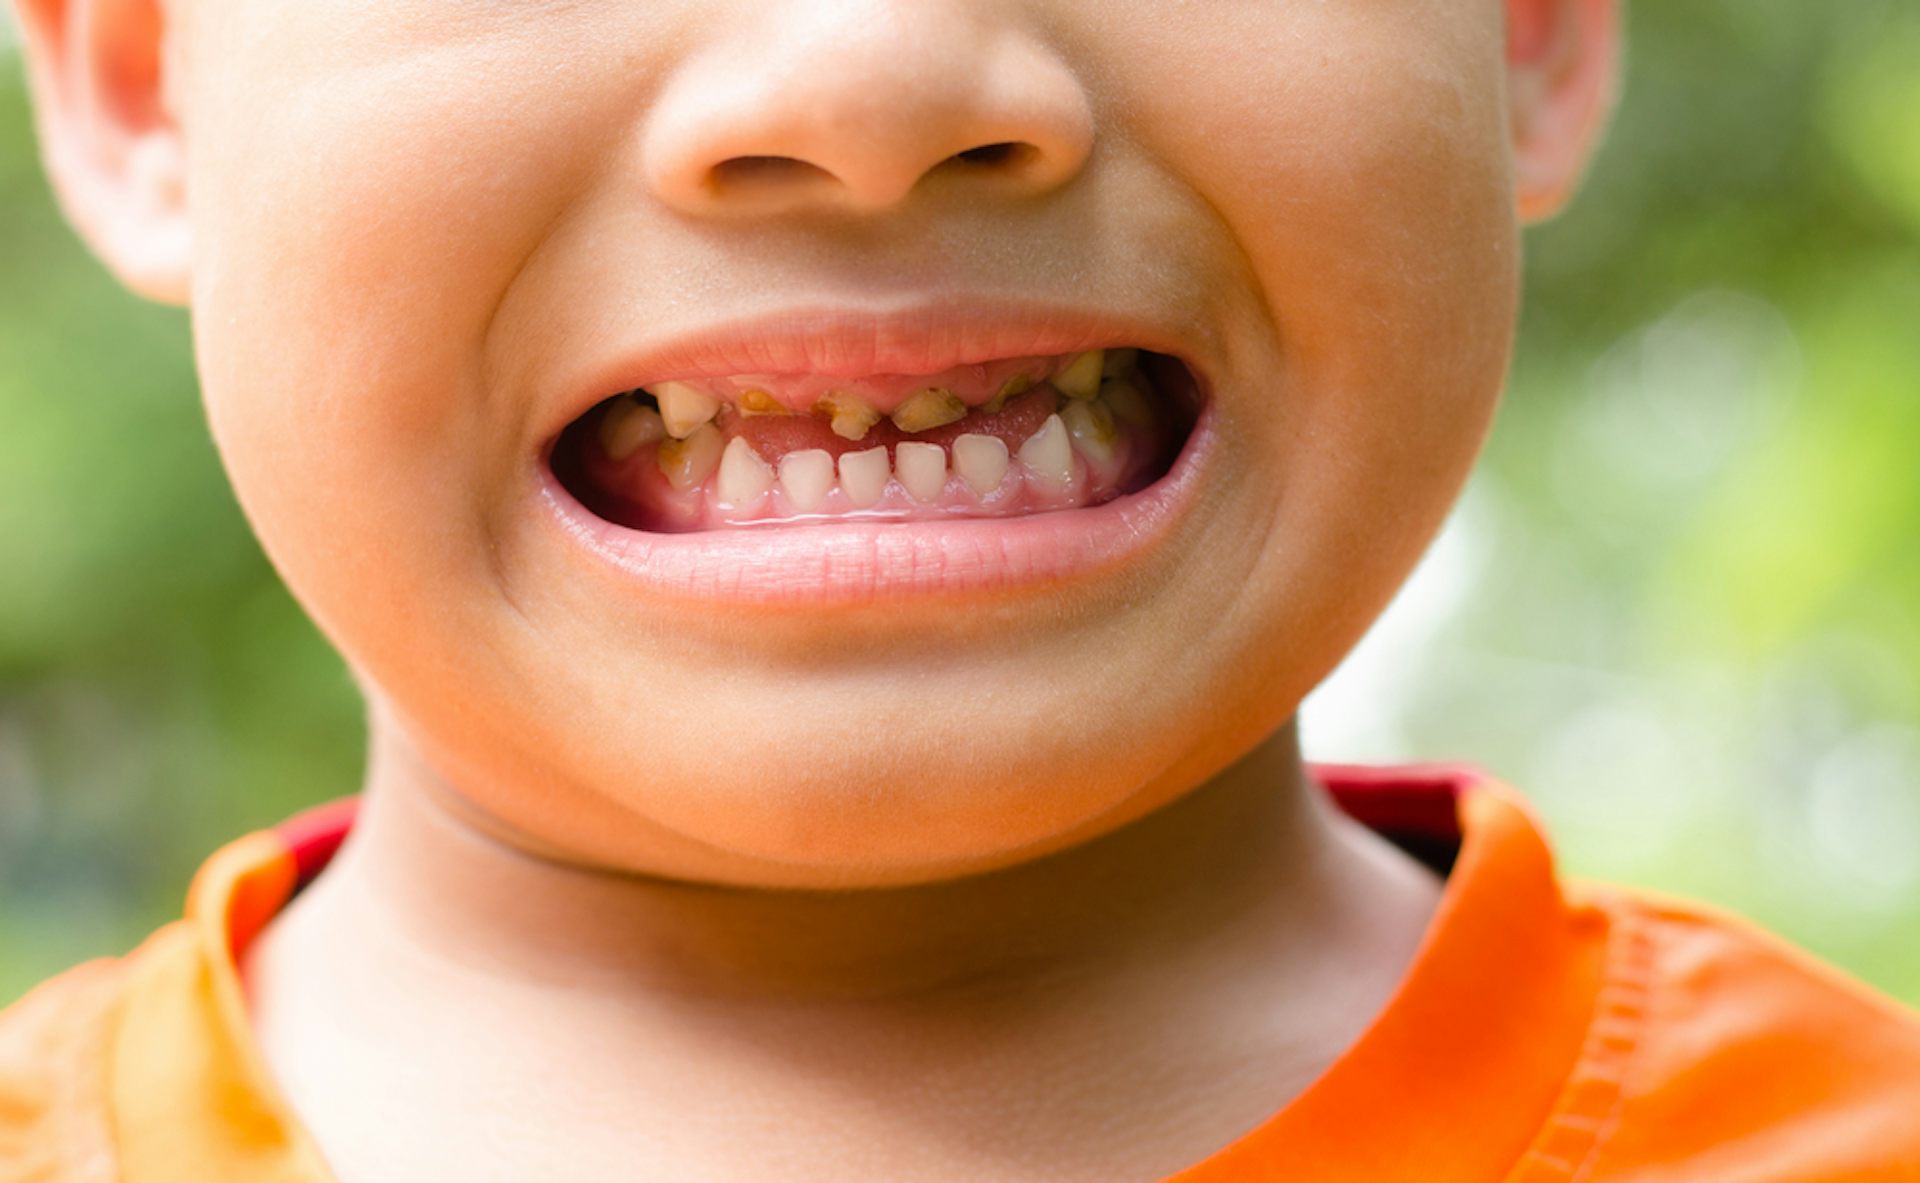 Child tooth decay is on the rise, but few are brushing their teeth ...